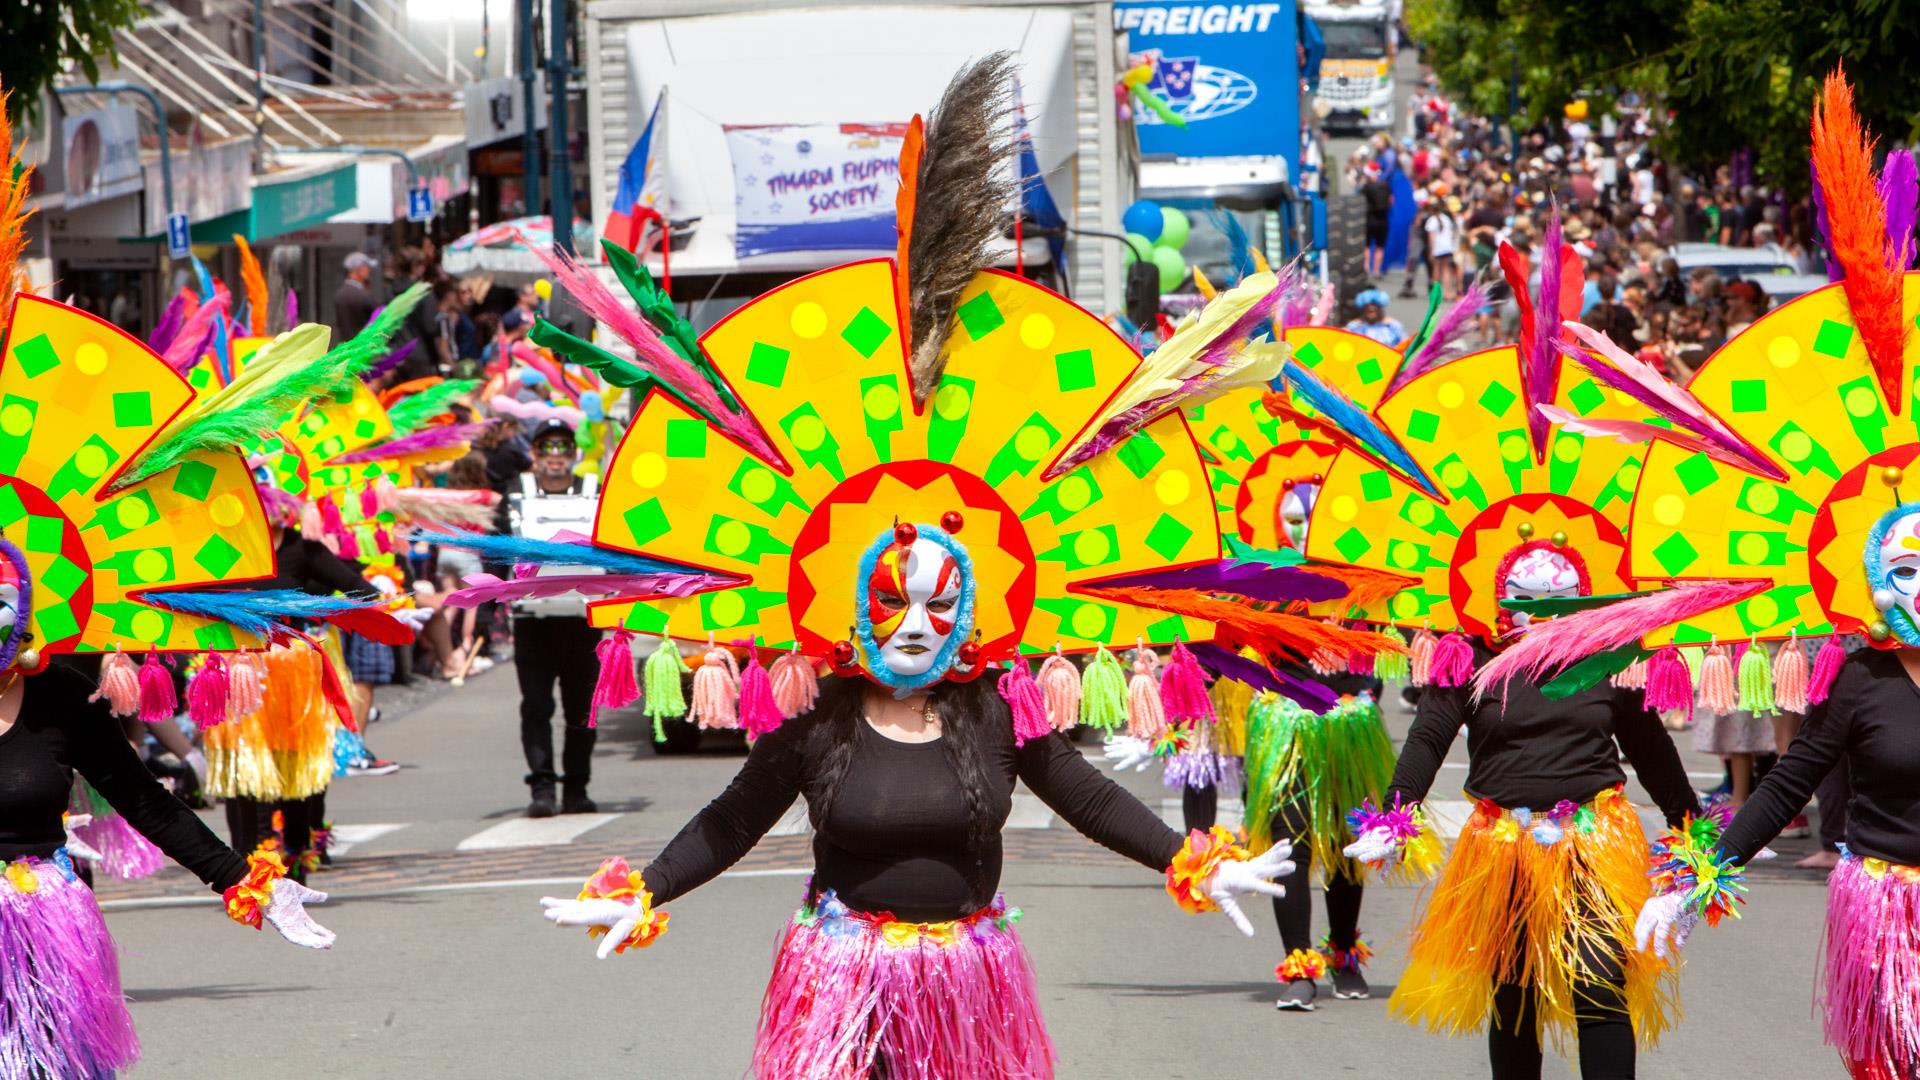 Among many floats, the prize winning Timaru Filipino Society added a magnificent splash of colour to the 2022 Xmas Parade.